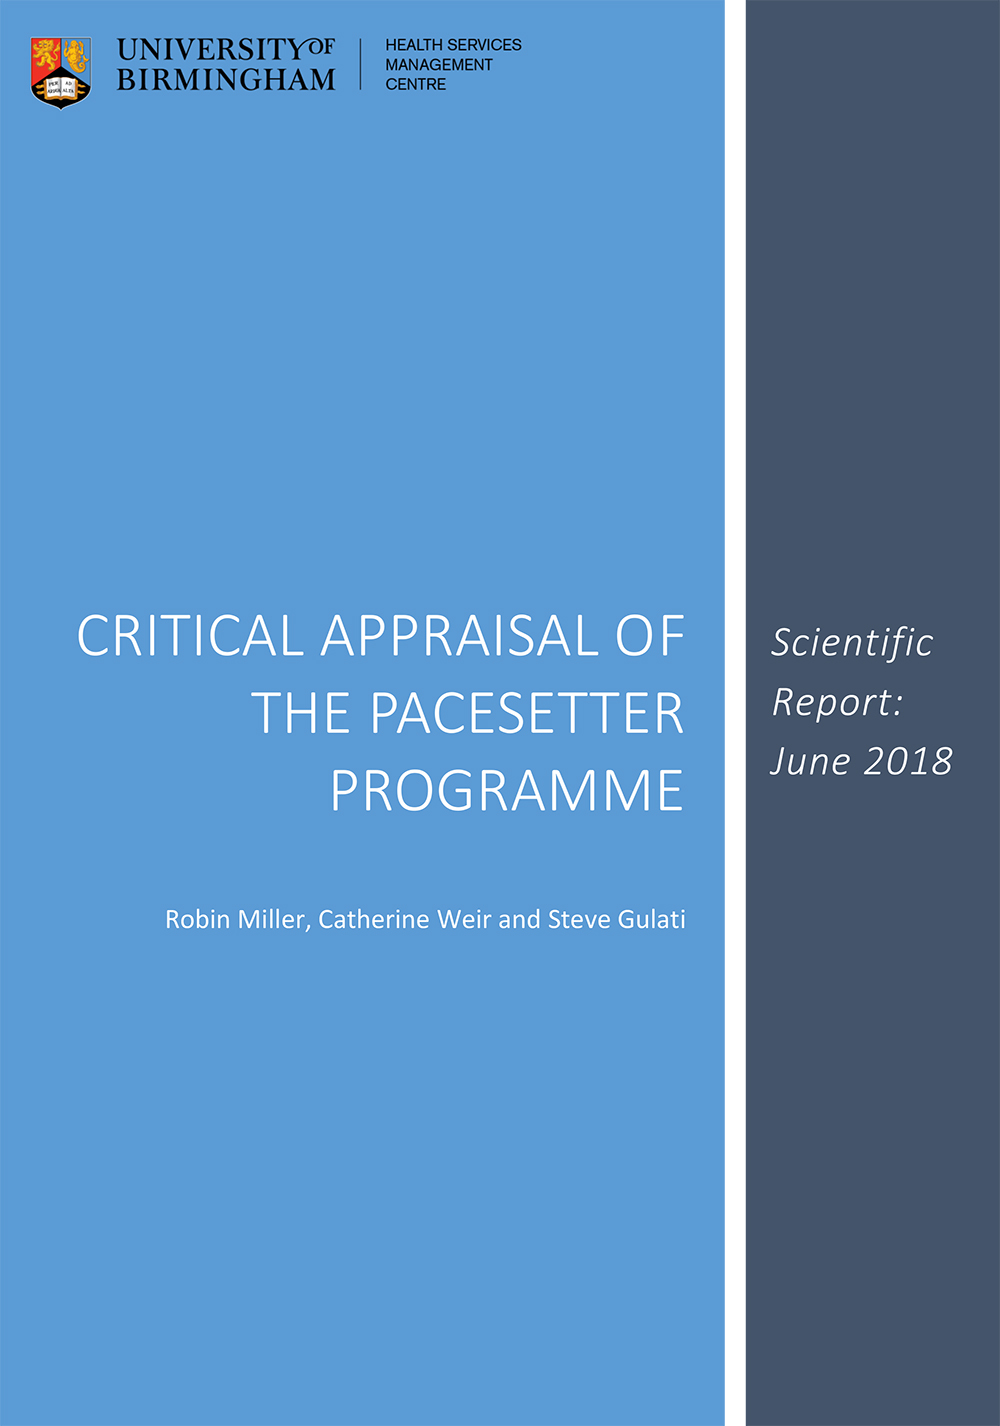 Critical Appraisal of the Pacesetter Programme